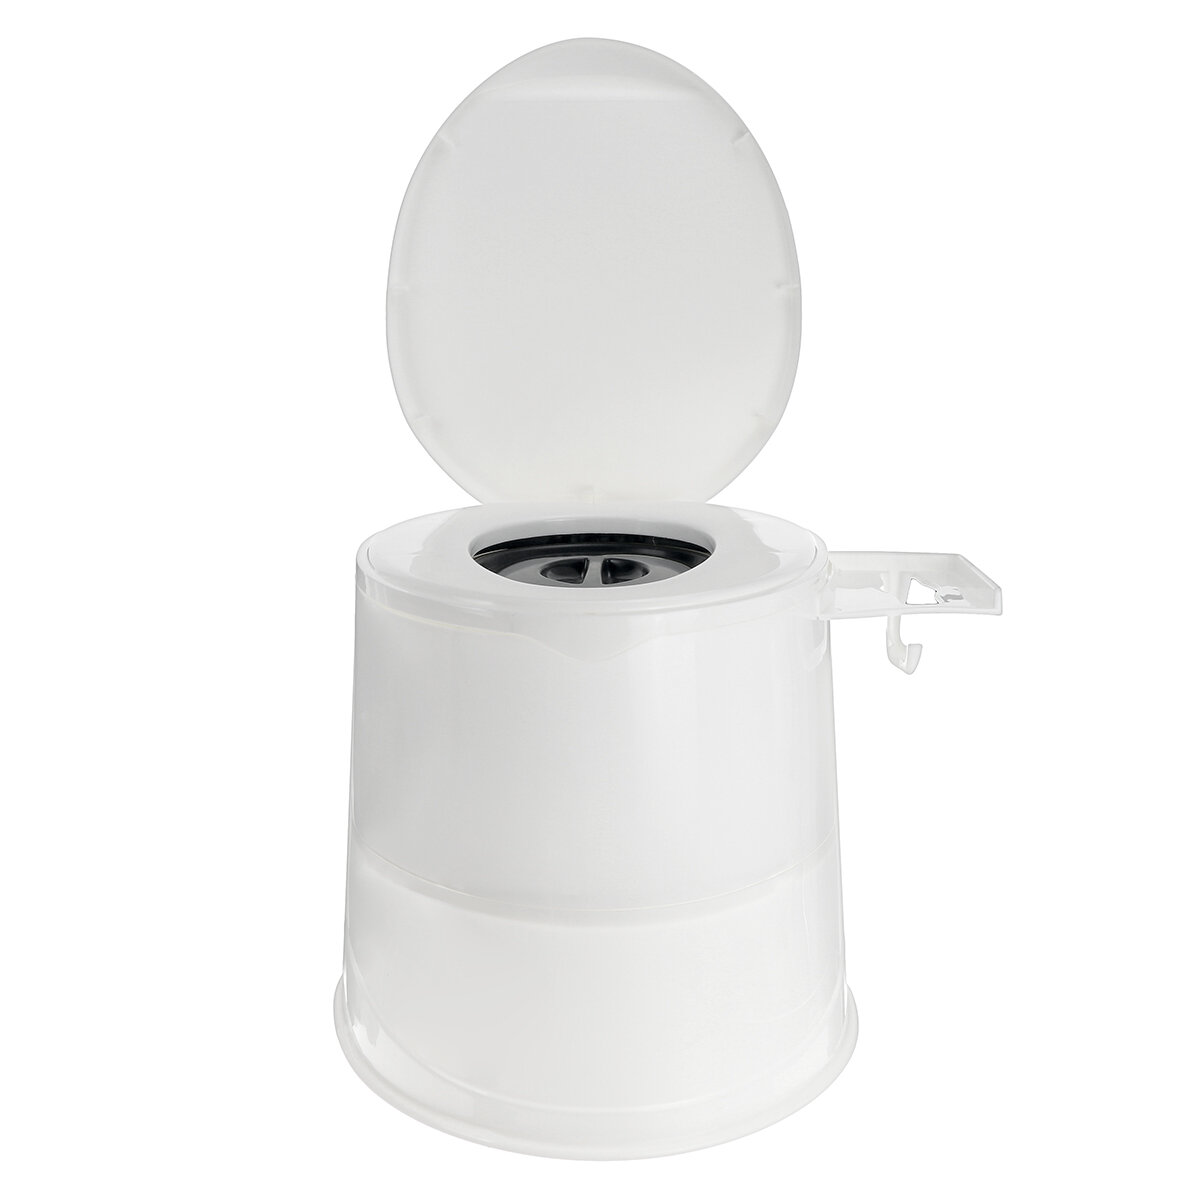 

Portable Toilet Camping Travel Indoor Outdoor Detachable Potty Commode Emergency